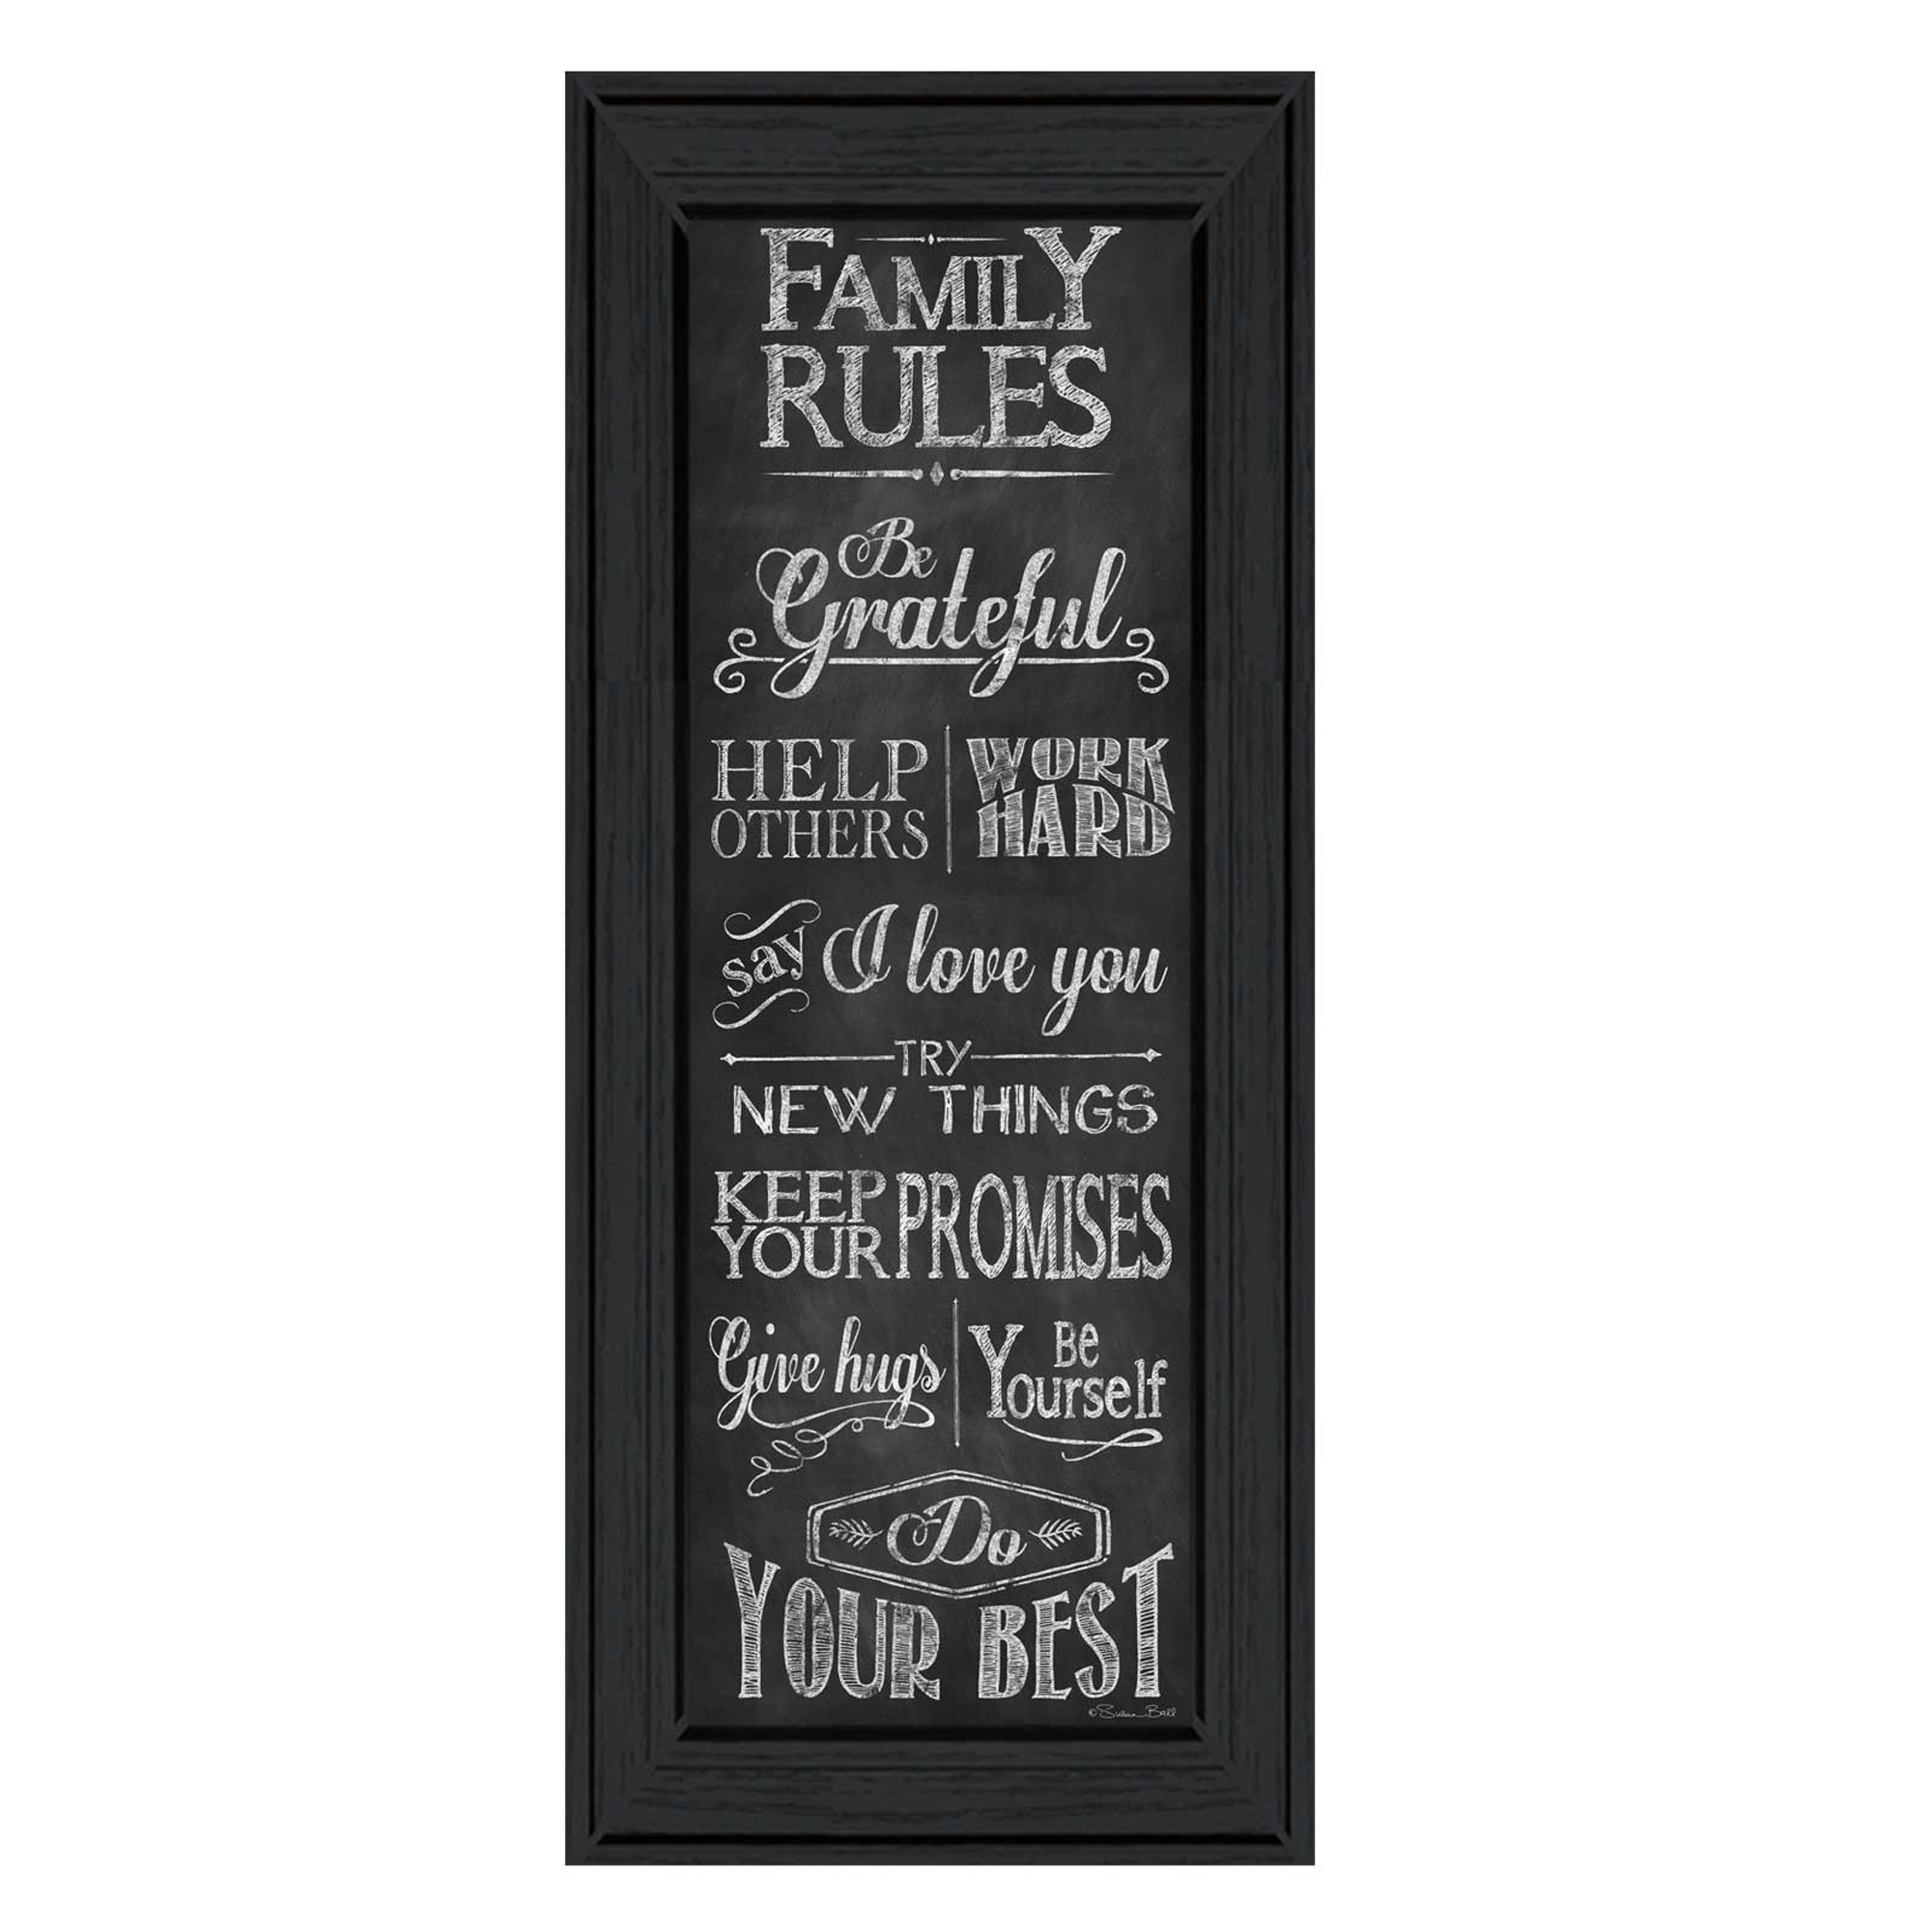 "Family Rules" By Susan Ball, Printed Wall Art, Ready To Hang Framed Poster, Black Frame